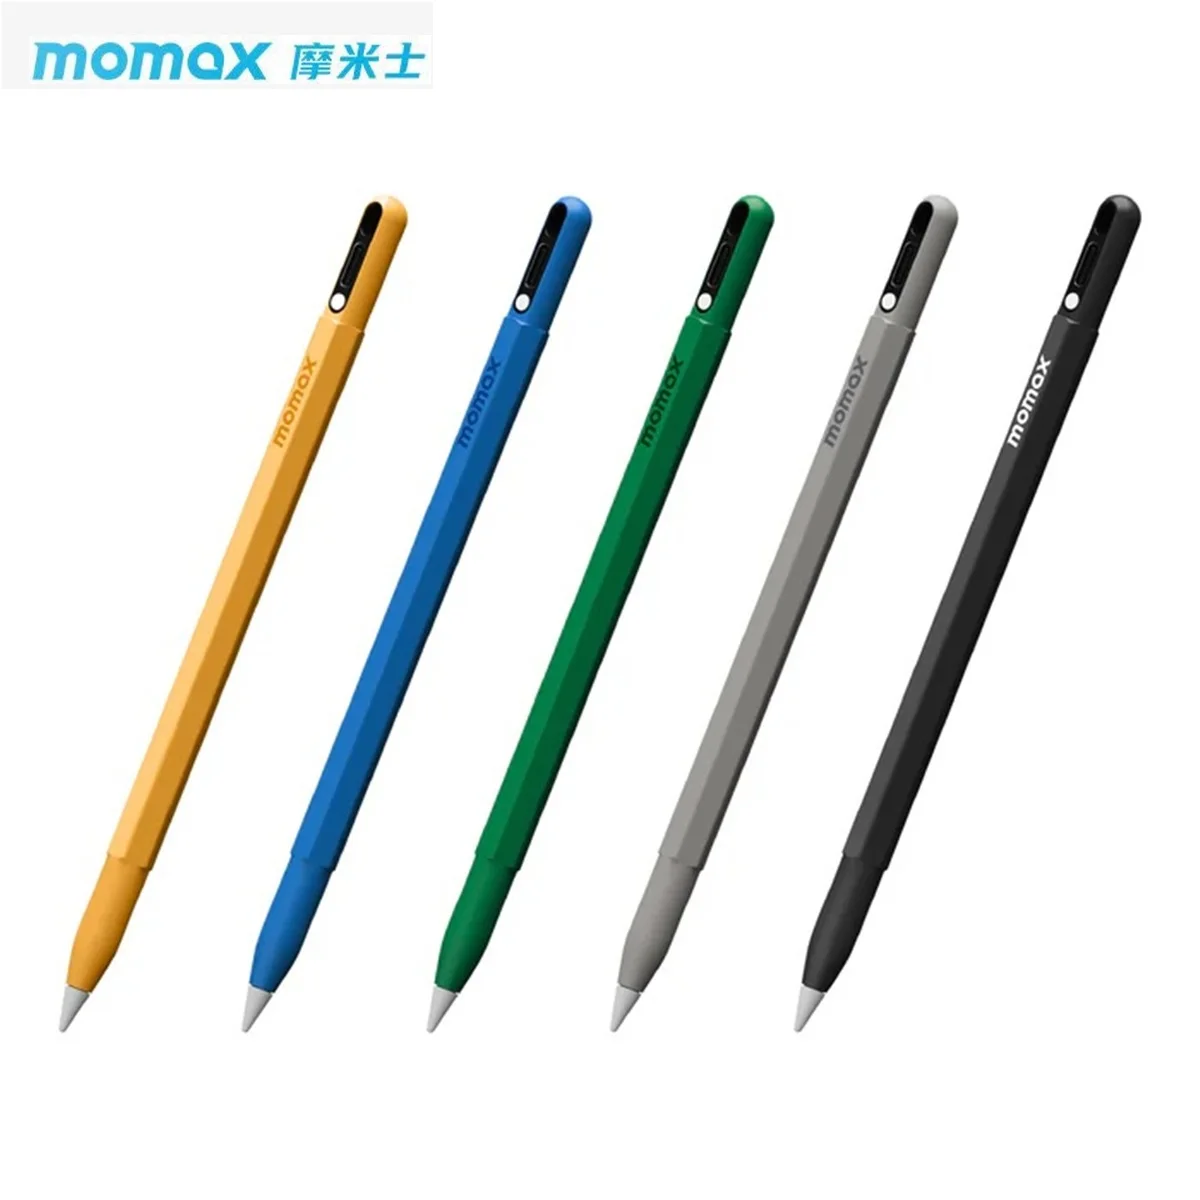 

Momax Mag Link Pop Magnetic Active Stylus Pen Ipad Pencil High Sensitivity Smart Pen With Palm Rejection Anti Rolling Fine Tip